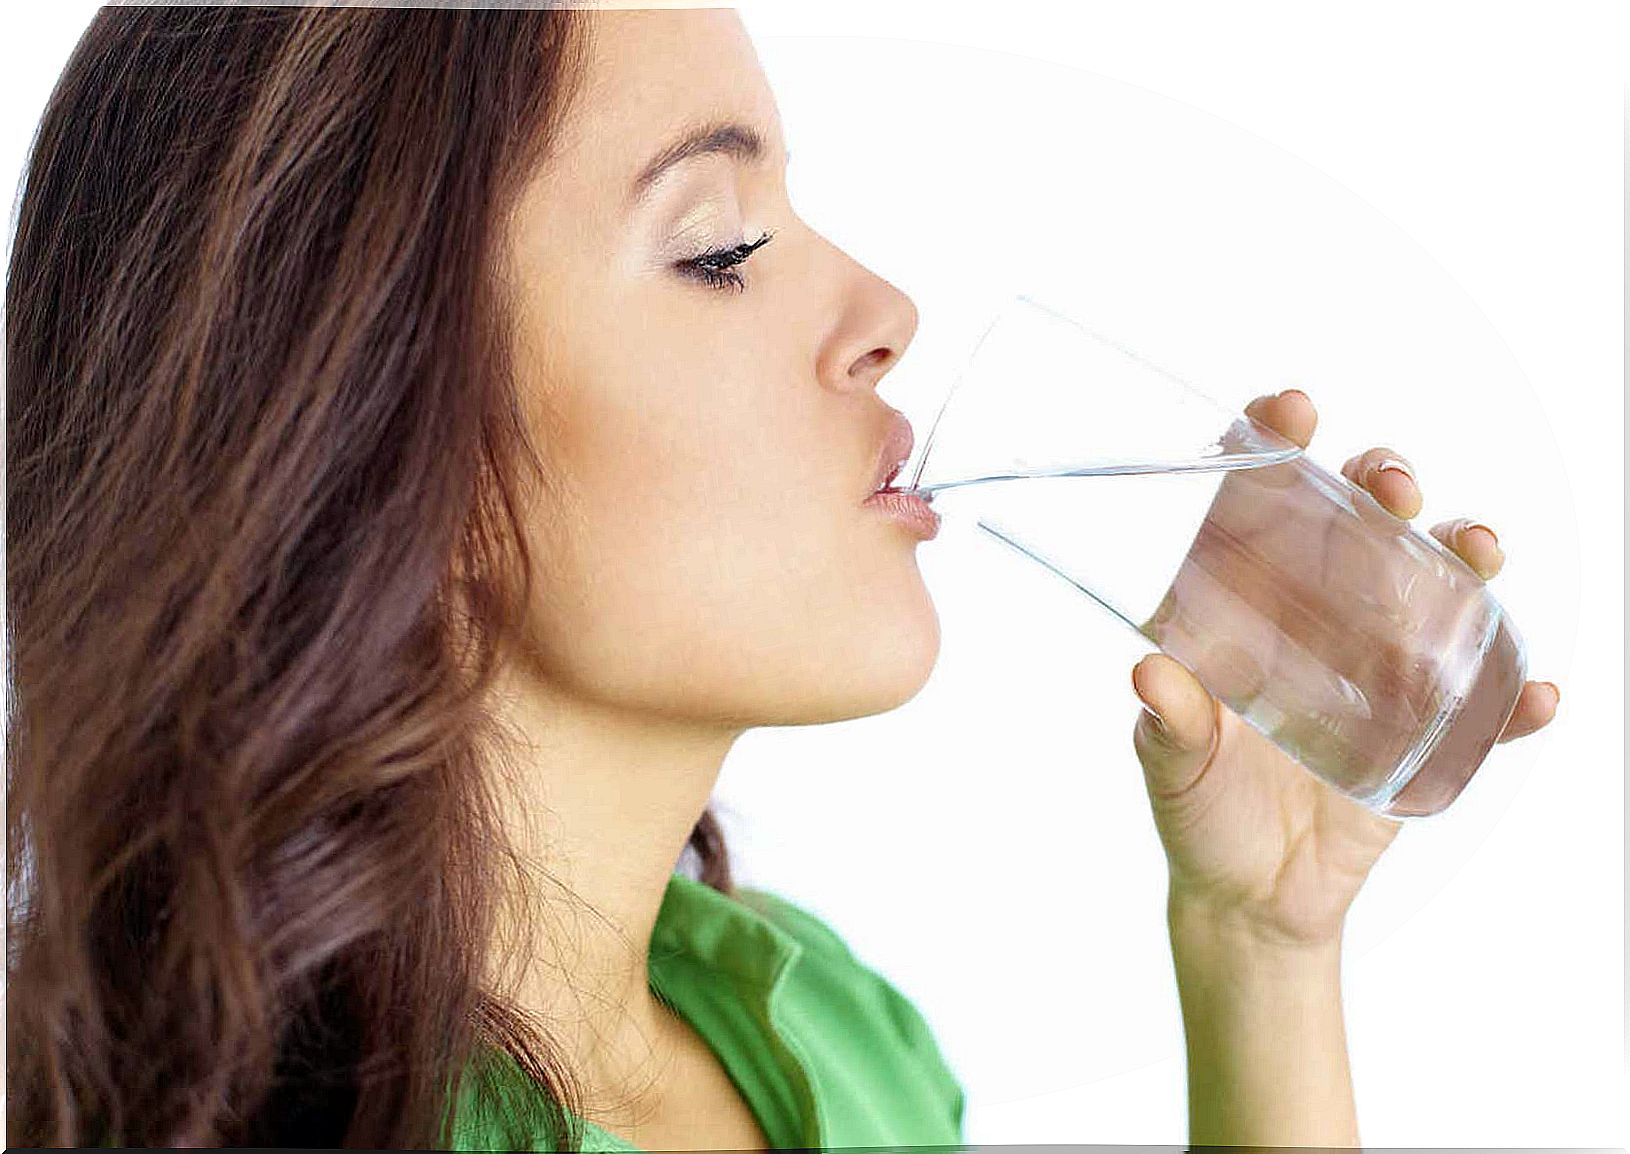 Strengthen your immune system with water